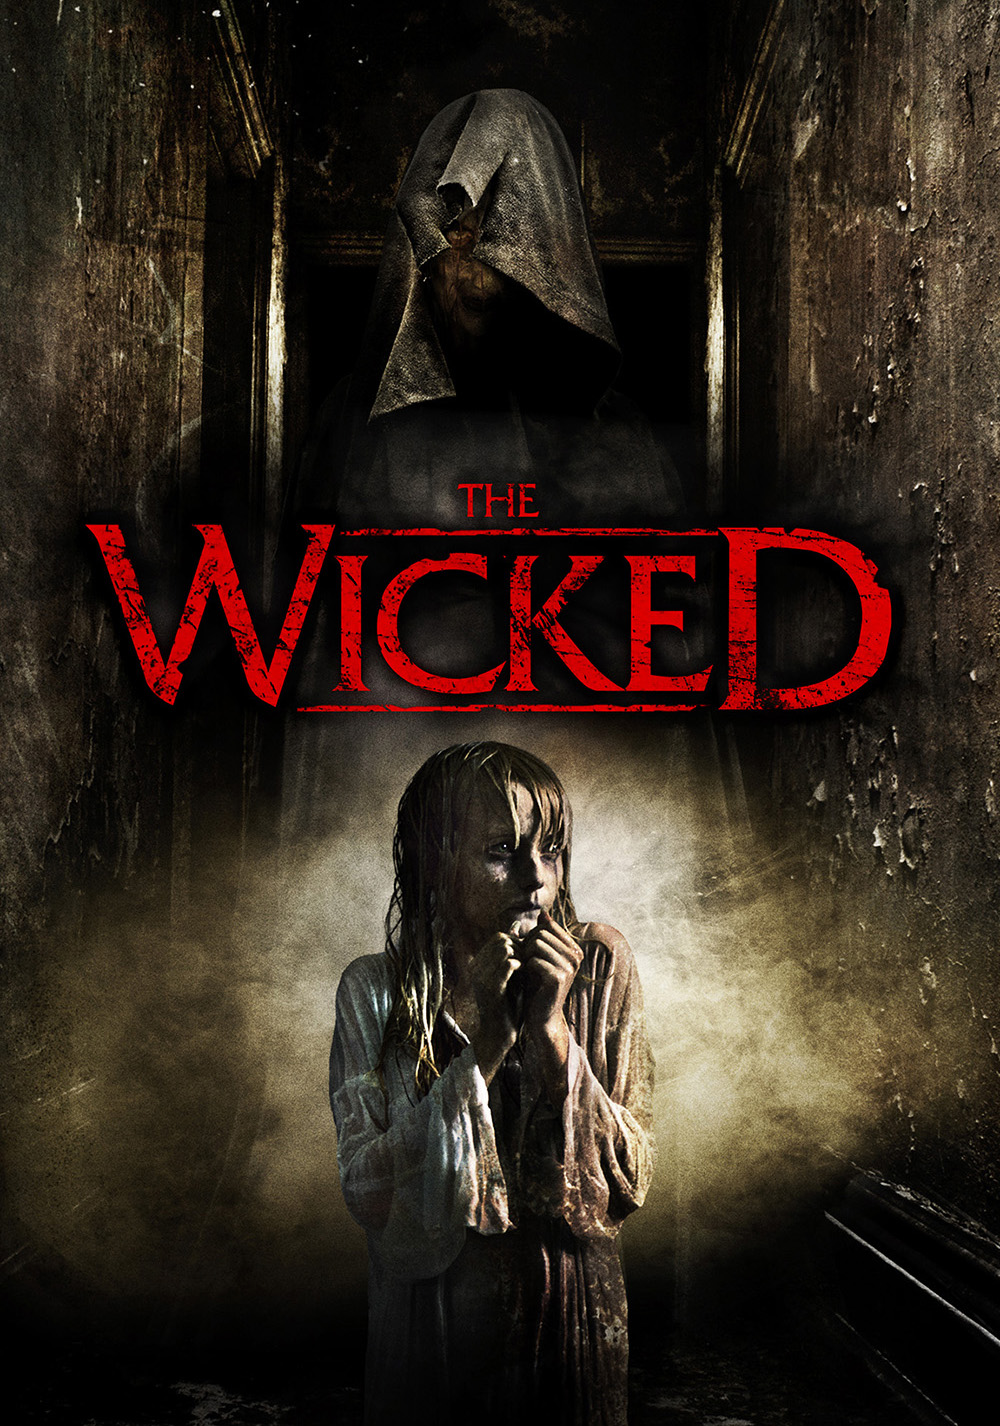 The Wicked (2013) 